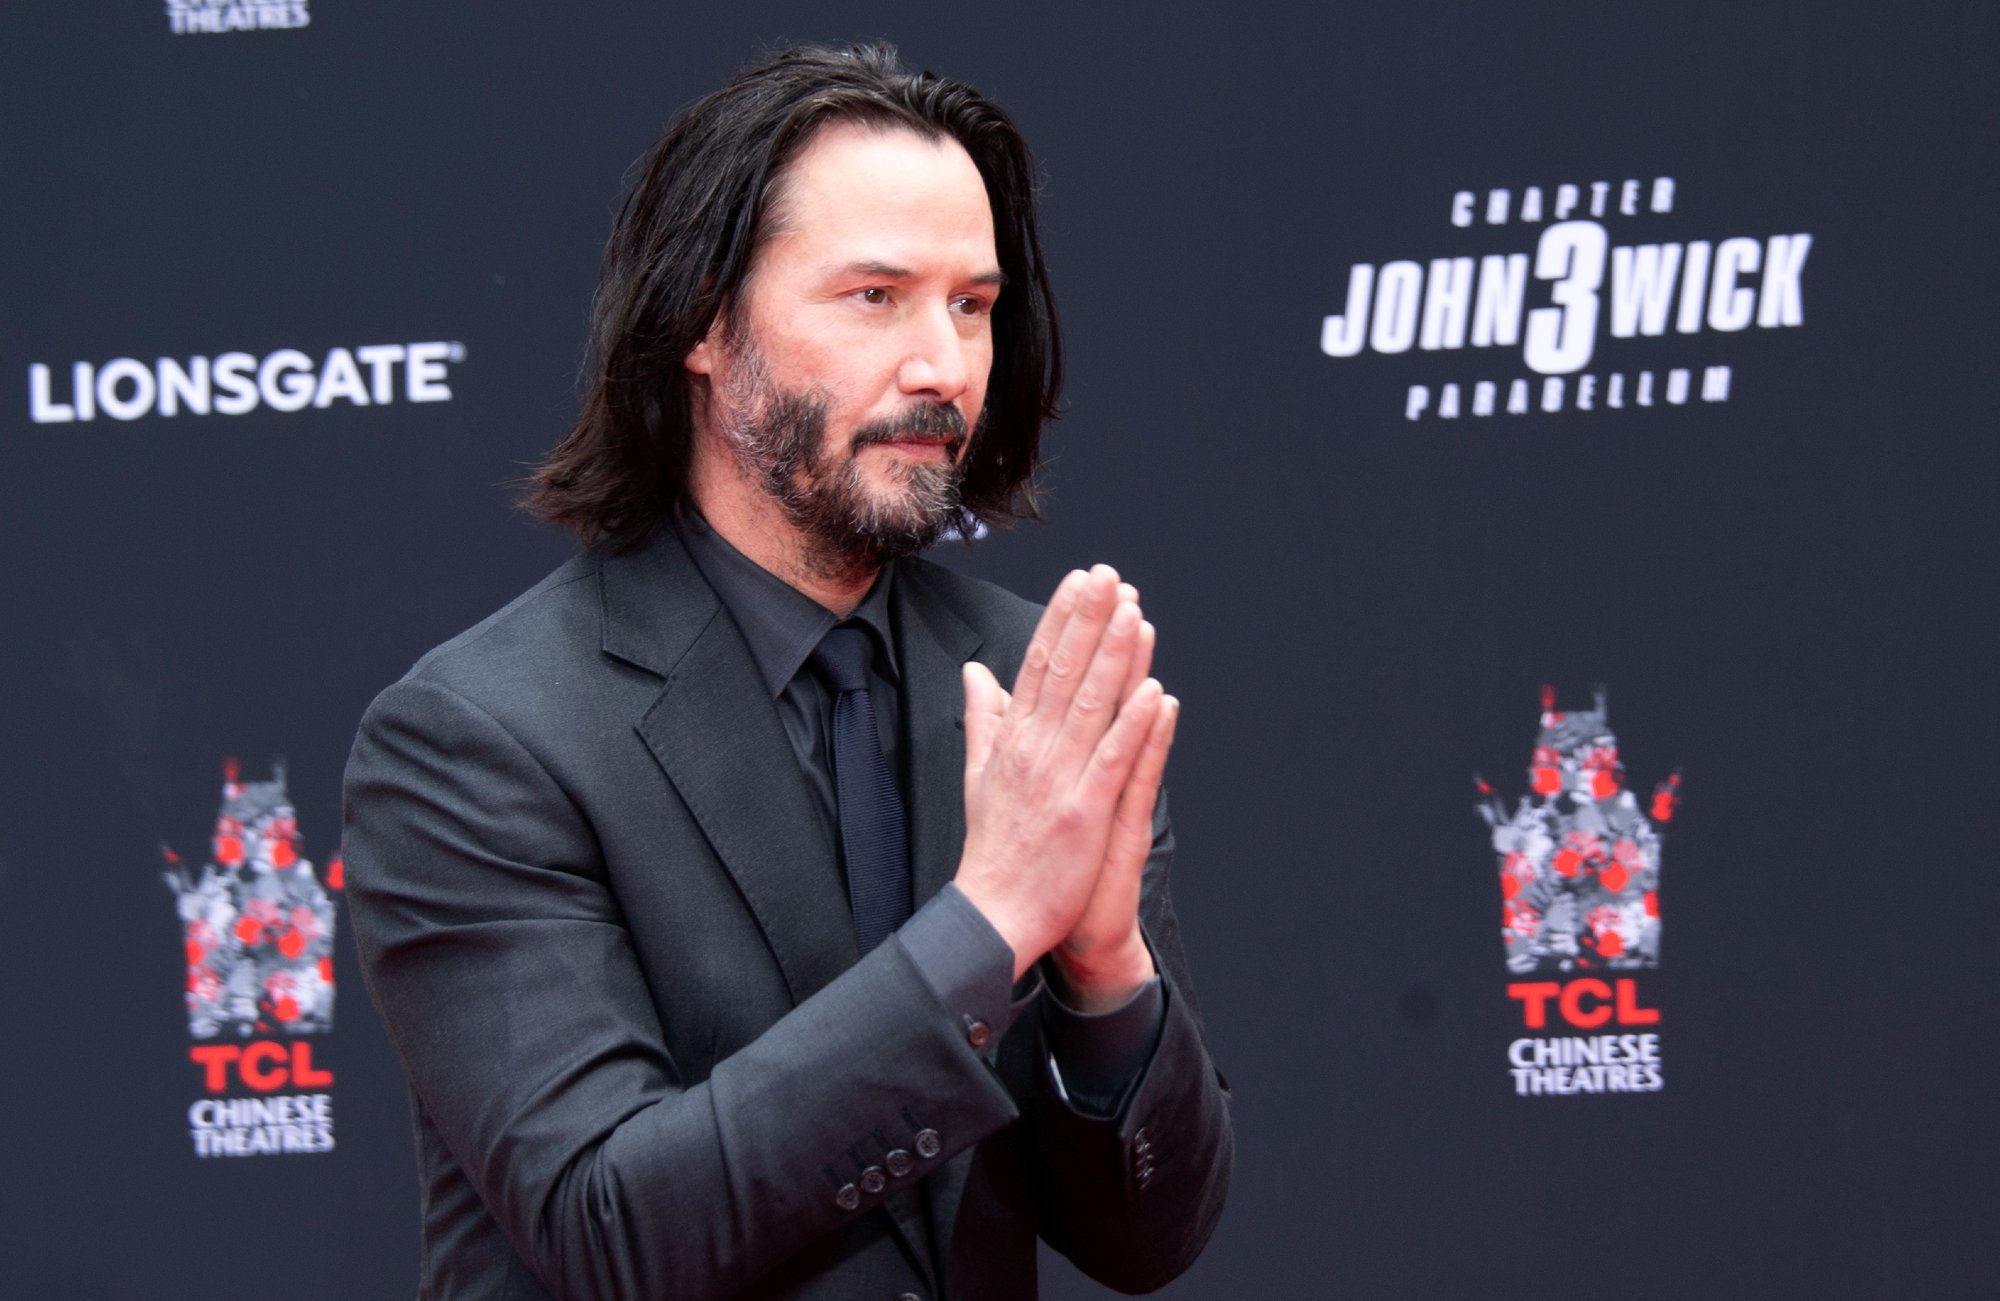 'John Wick 4' star Keanu Reeves at the TCL Chinese Theatre with his hands clasped